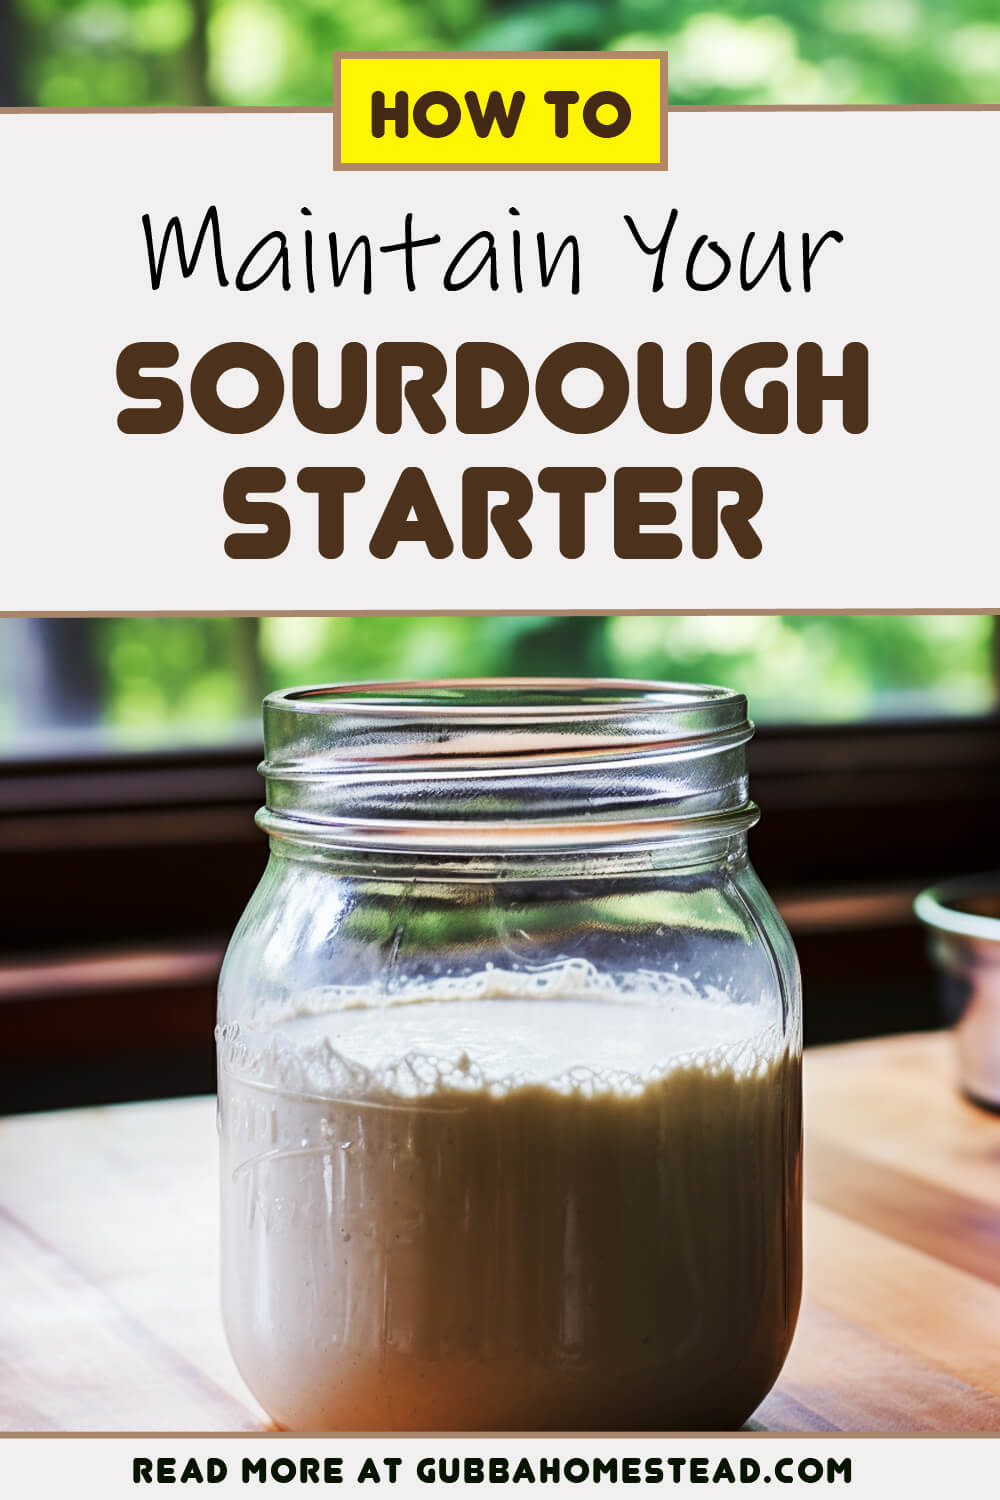 Here’s How to Maintain Your Sourdough Starter Like a Pro